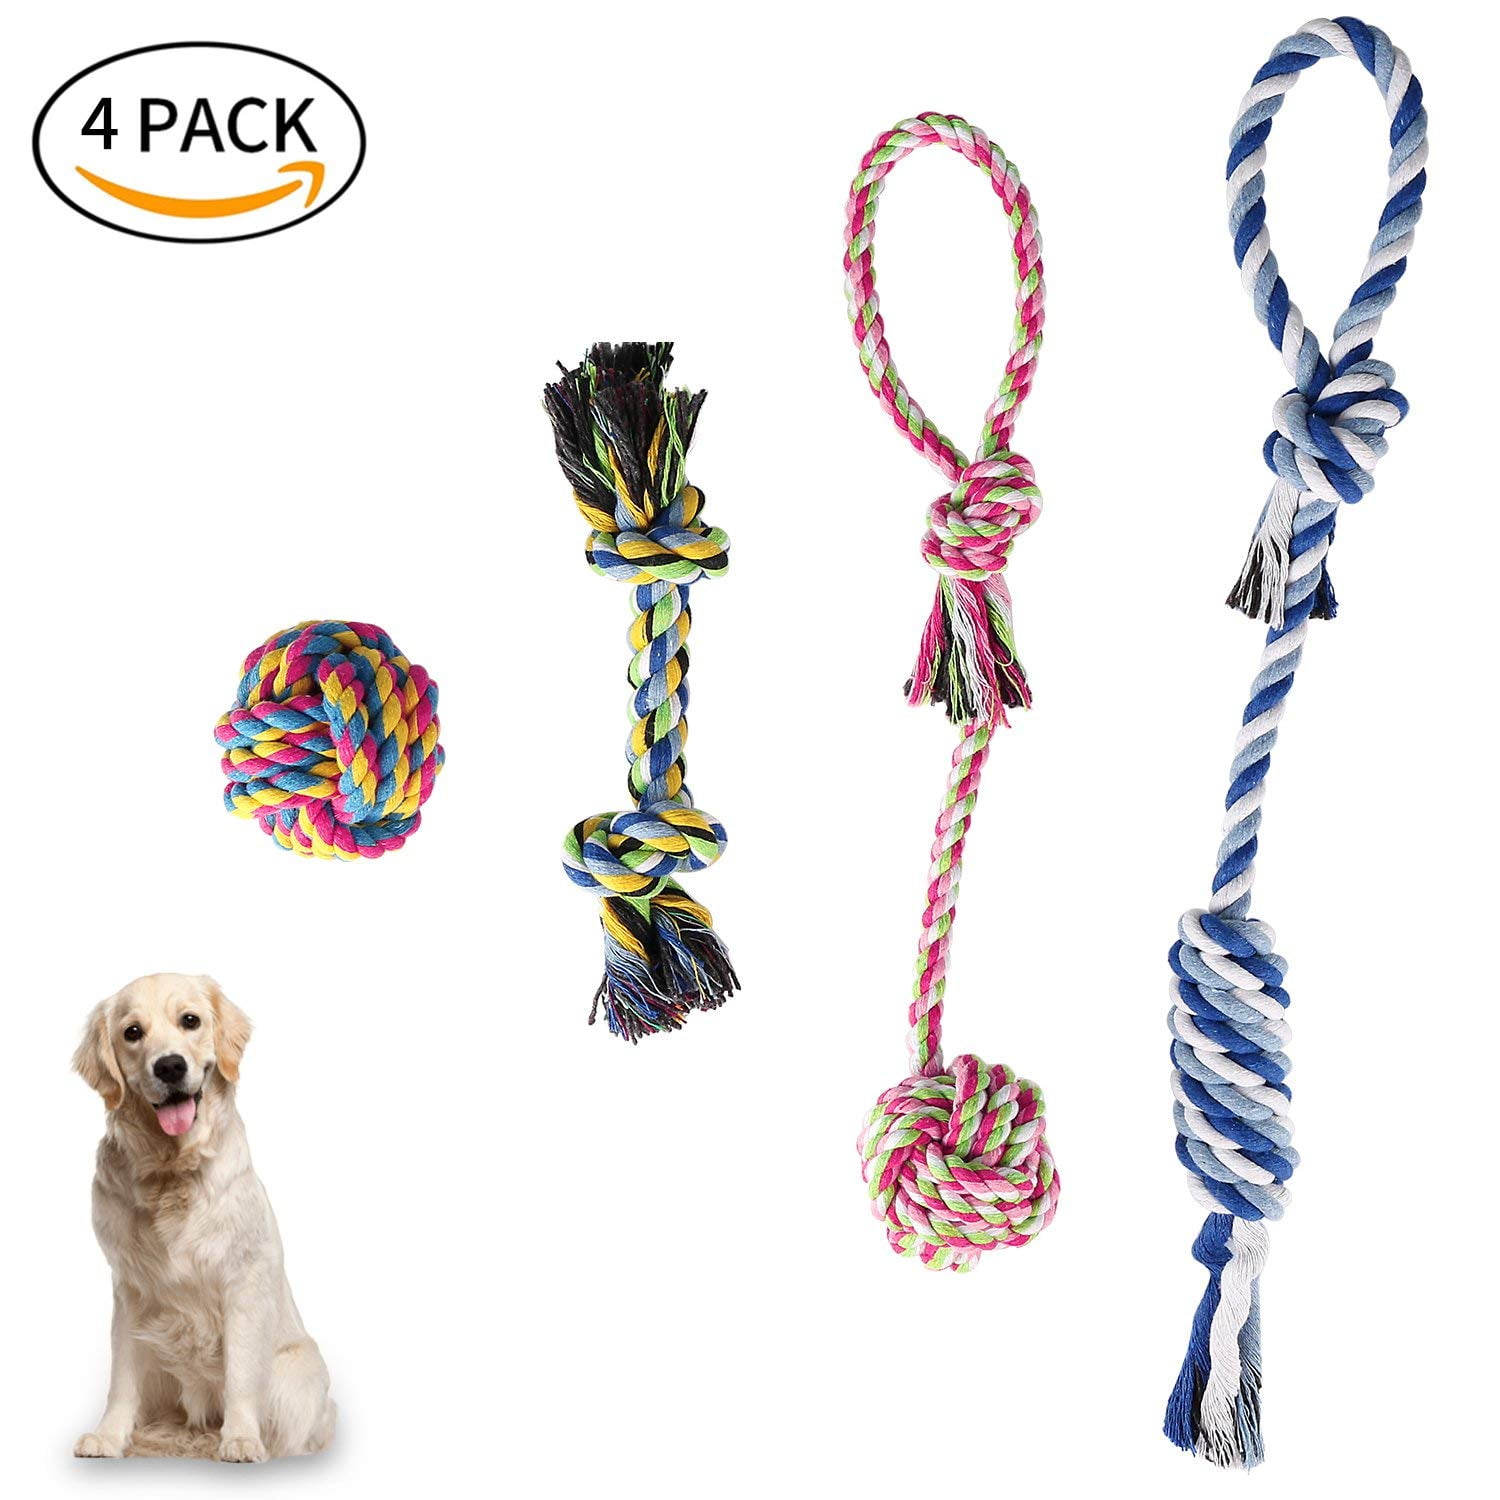 Voovpet Dog Toys for Small Dogs Rope Toys for Dogs Chew Toy Cute